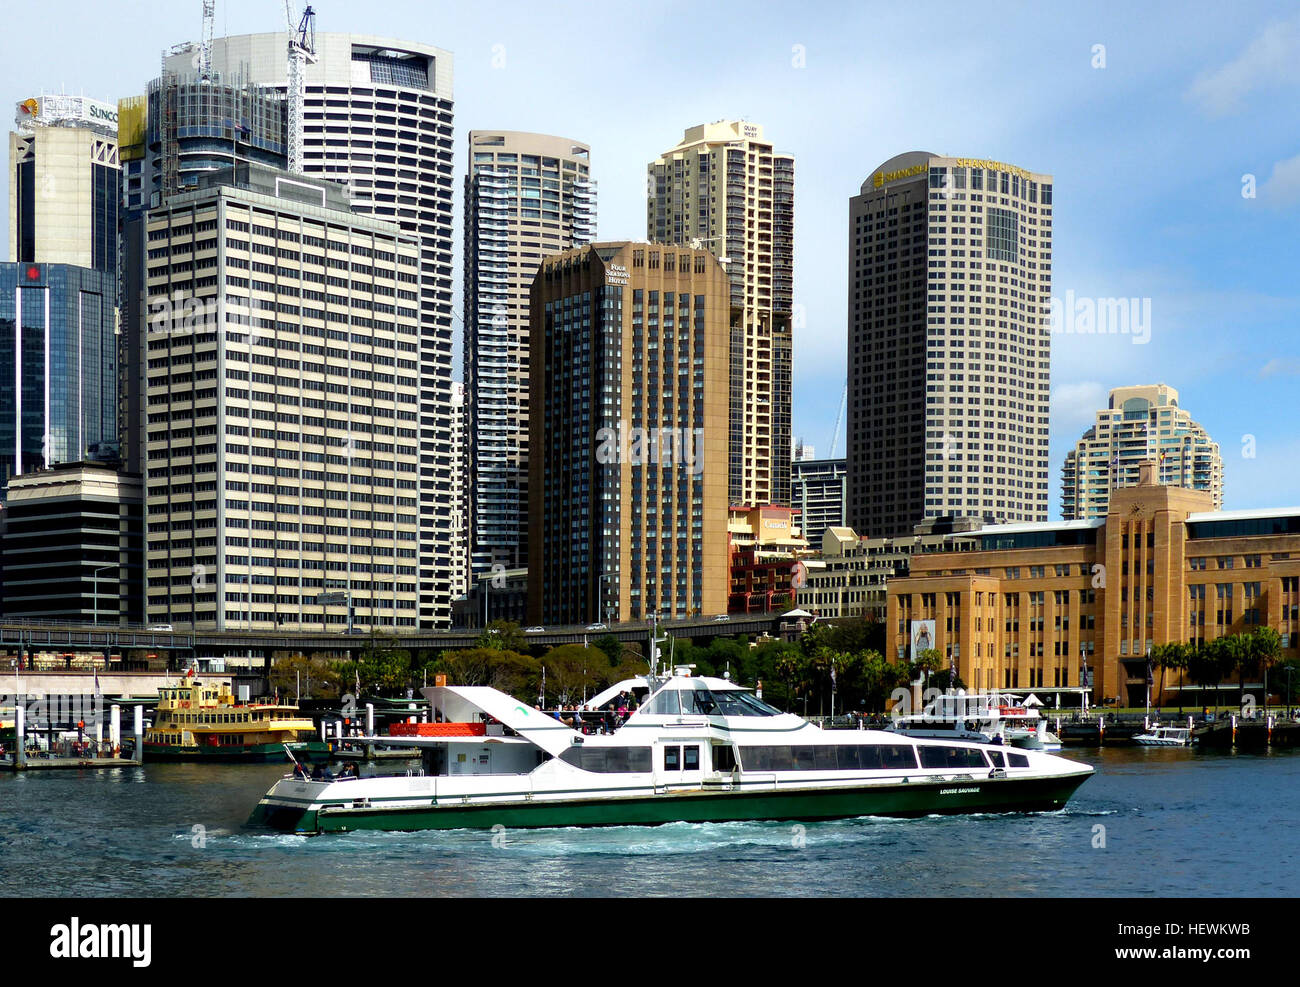 The '''Sydney RiverCats''' are a class of catamaran+s operated by Harbour City Ferries on the Parramatta River+.  Between 1992 and 1995, the State Transit Authority purchased seven RiverCats from NQEA Australia, Cairns+ to operate Parramatta River services+. They replaced First Fleet class ferries on the Circular Quay+ to Meadowbank serice, as well as allowing services to be extended to Parramatta wharf from 1993. They were named after famous Australian female athletes. Stock Photo